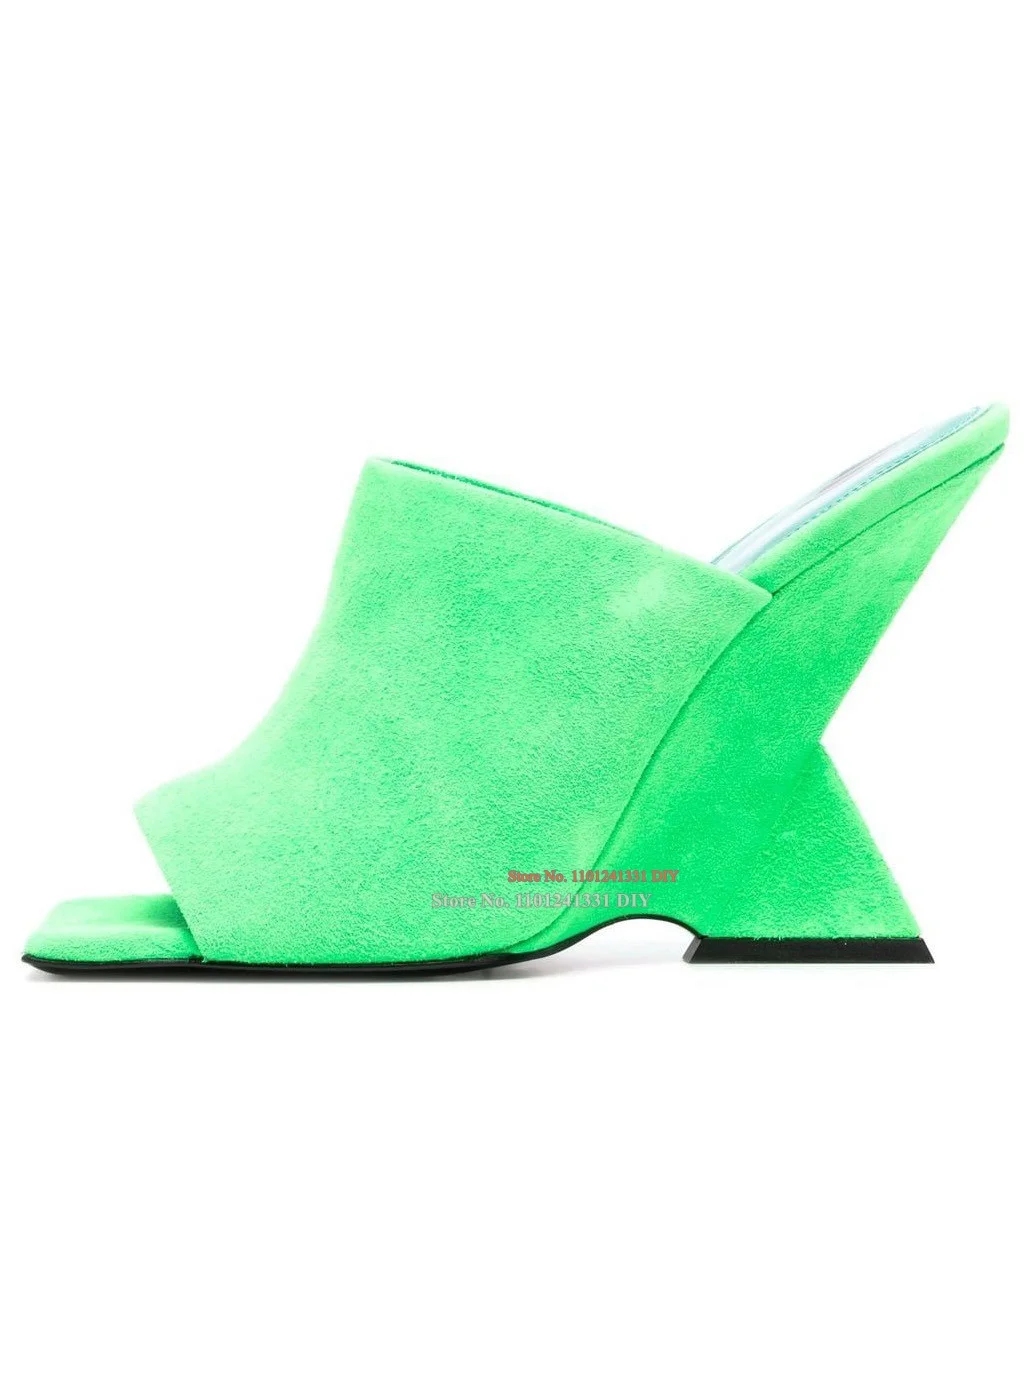 

Neon Green Pink Sculpted Calf Suede Leather Pumps Abnormal High Heeled Women Mule Shoes Peep Toe High Heel Dress Shoes